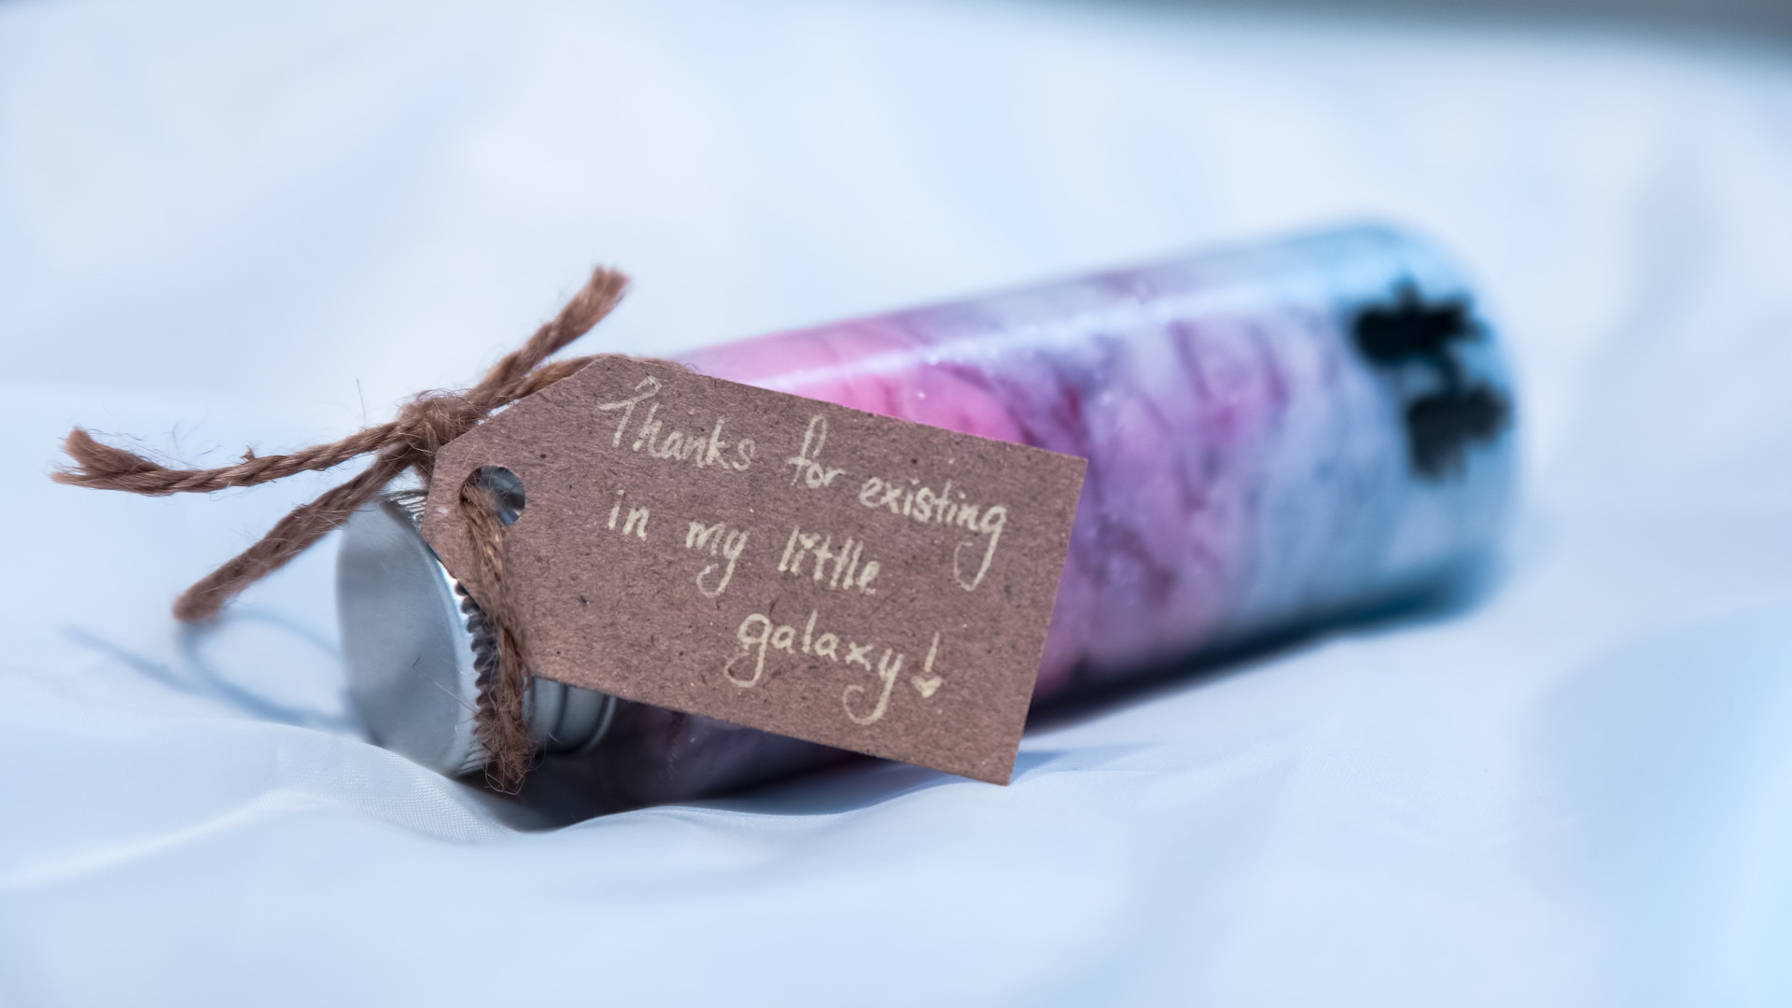 Decorative image of gift bottle with a tag that reads 'Thanks for existing in my little galaxy!'